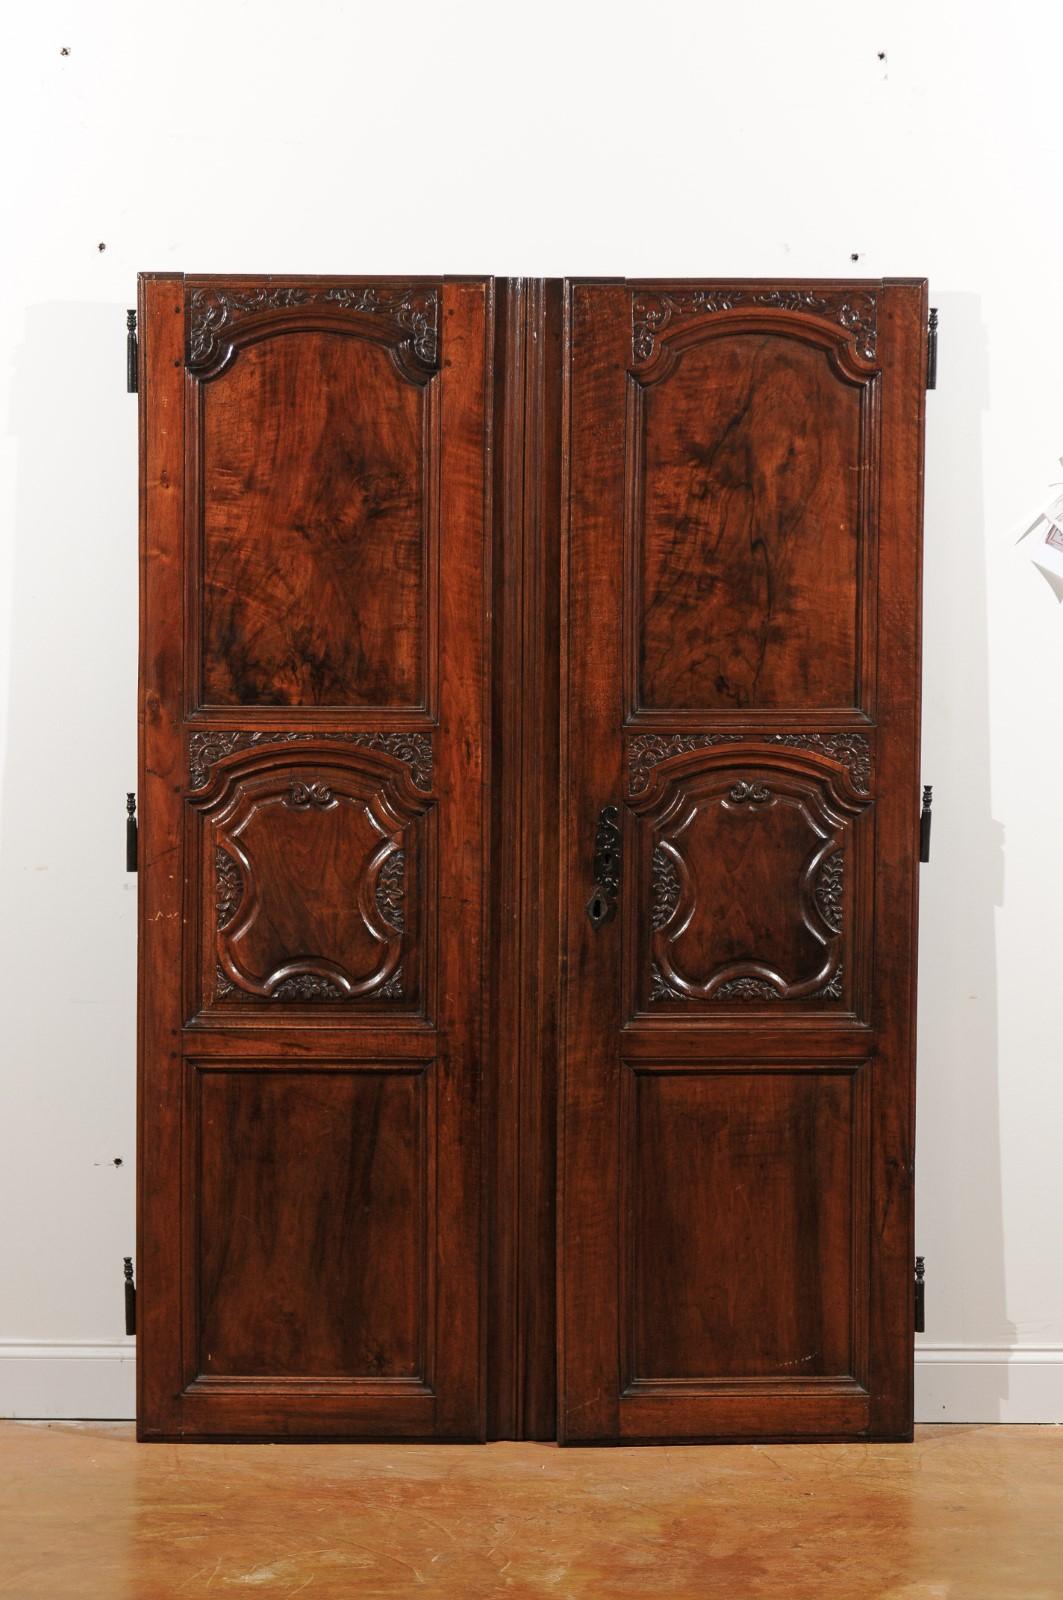 A pair of French Louis XV period hand carved walnut doors from the mid-18th century, with molded panels and foliage decor. Born in France during the reign of King Louis XV nicknamed Le Bien-Aimé (the Beloved), each of this pair of carved doors